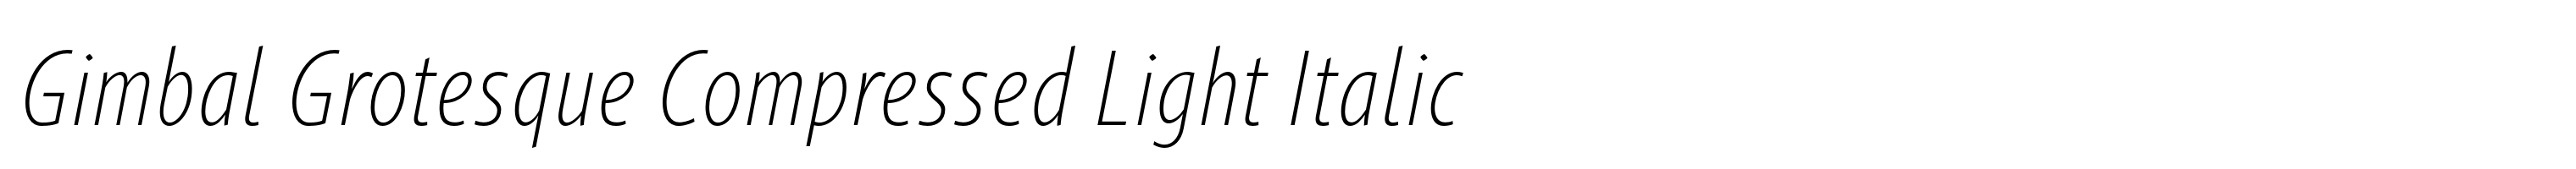 Gimbal Grotesque Compressed Light Italic